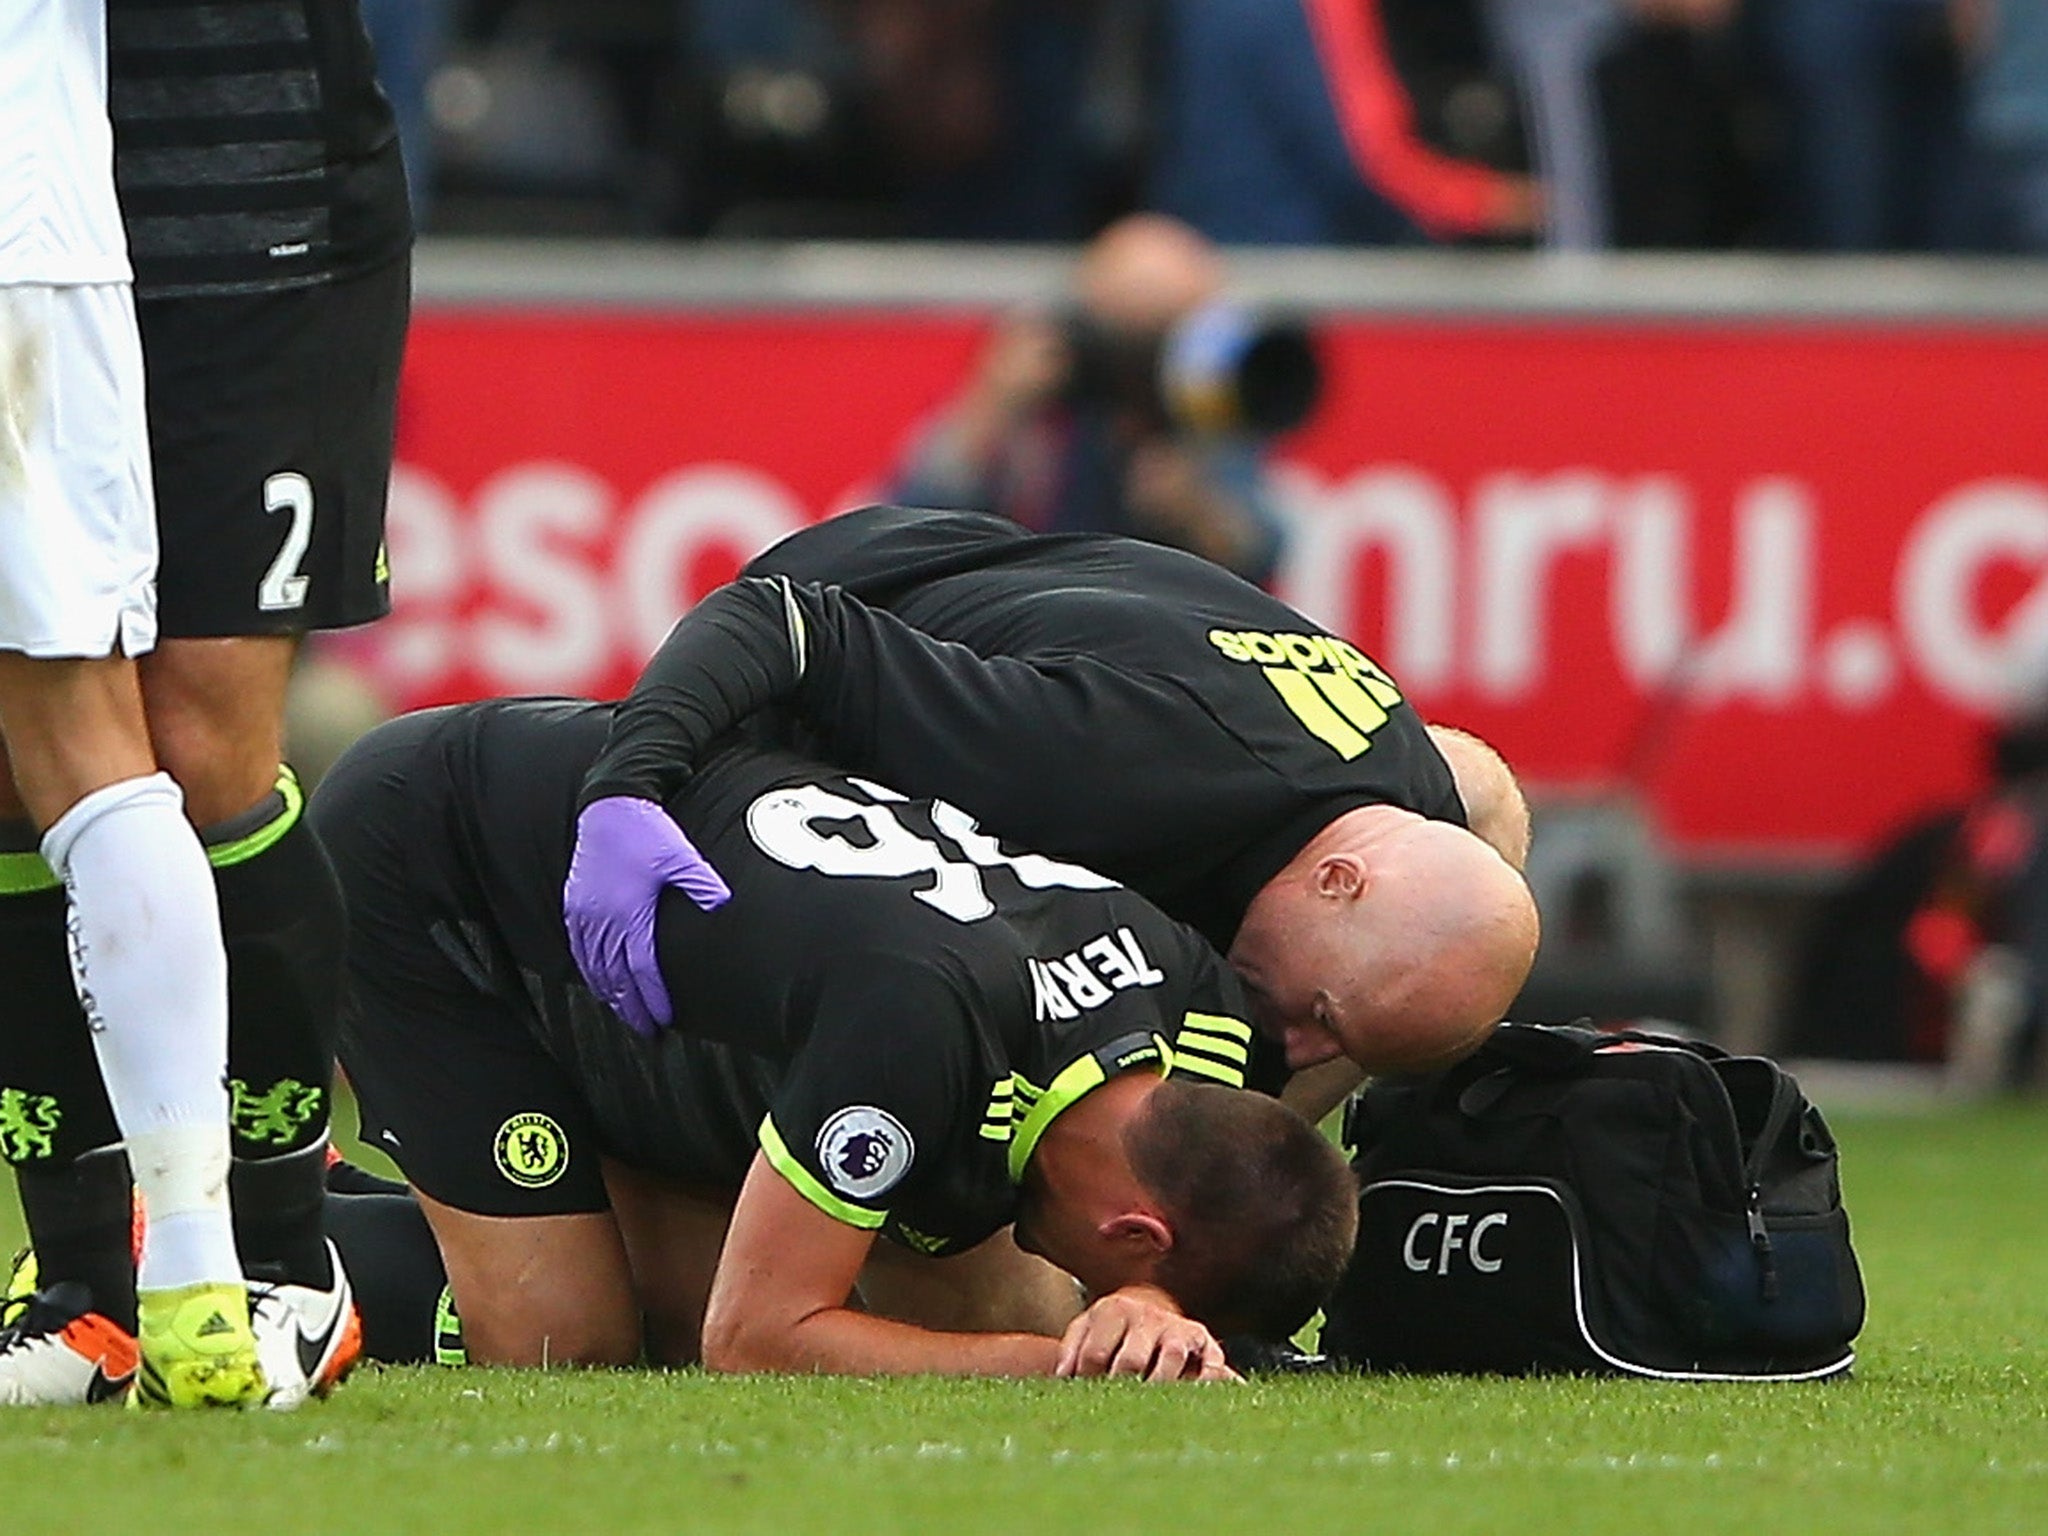 John Terry strained ligaments in his foot against Swansea